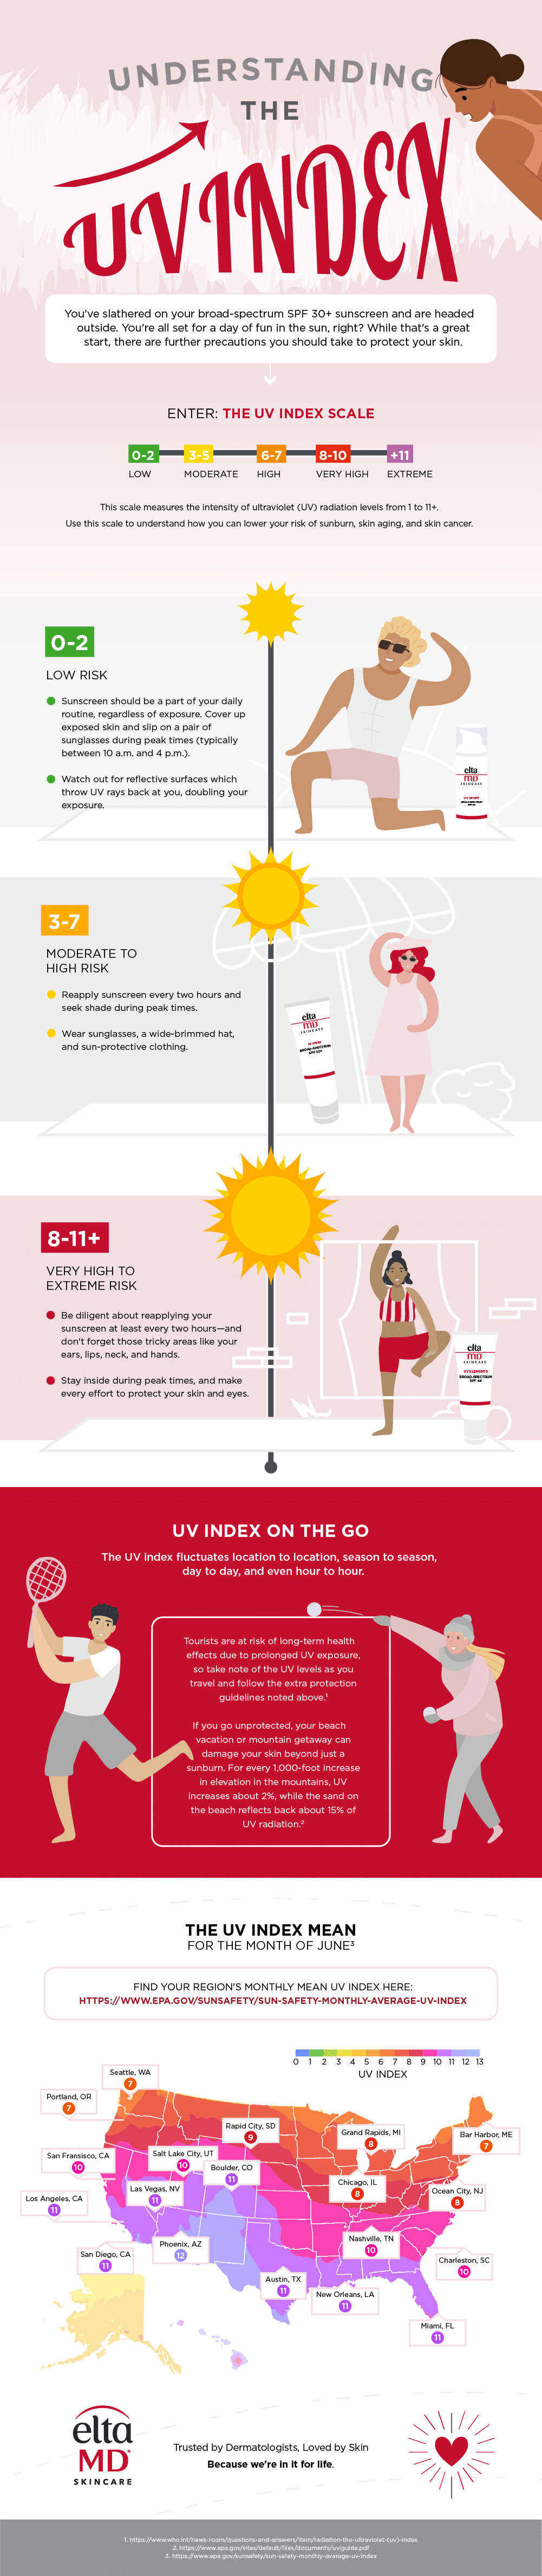 Infographic showing the UV index and sun safety facts and tips